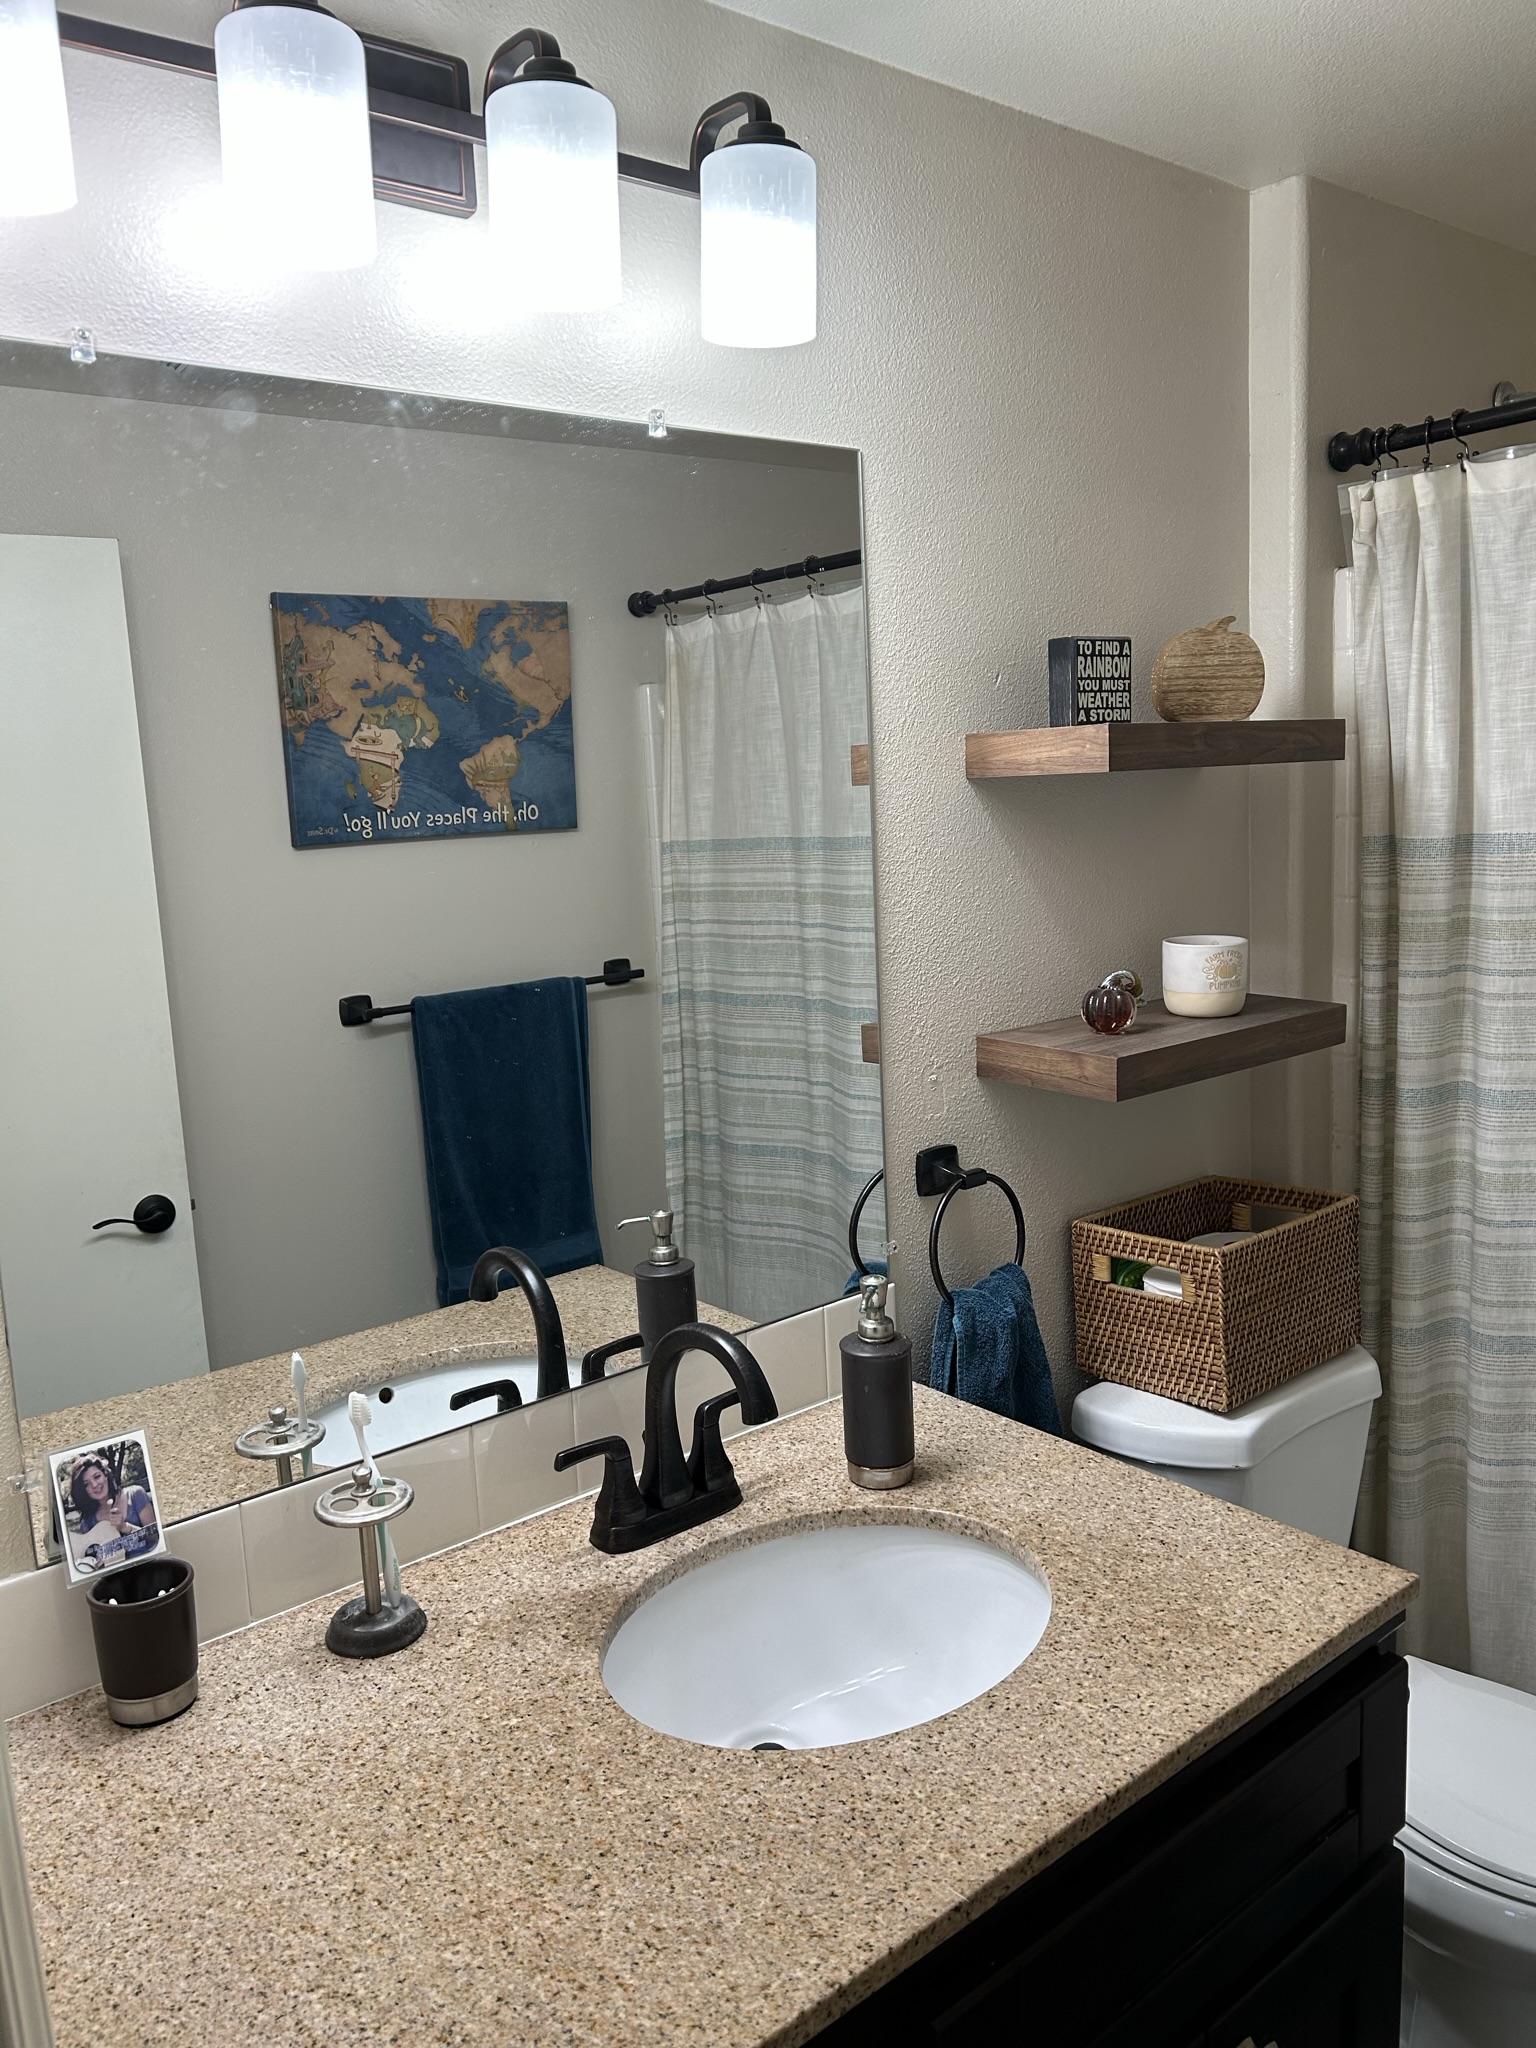 How I Remodeled My Bathroom For Less Than $350 – Easy DIY